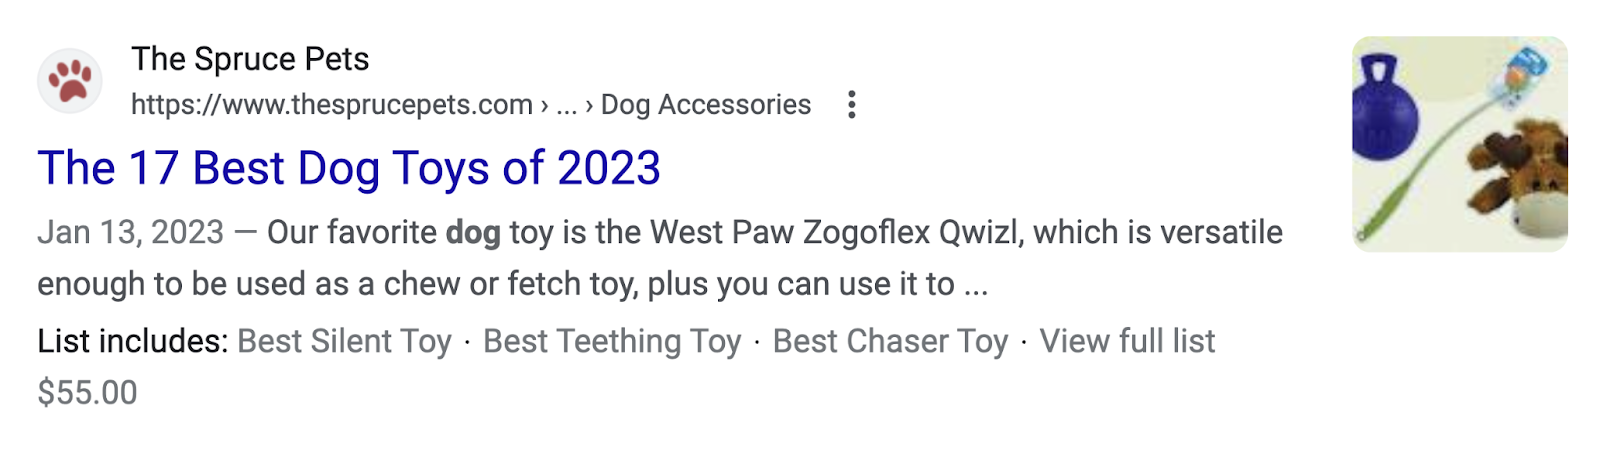 search results show "The 17 Best Dog Toys of 2023" listicle for“good toys for dogs” search